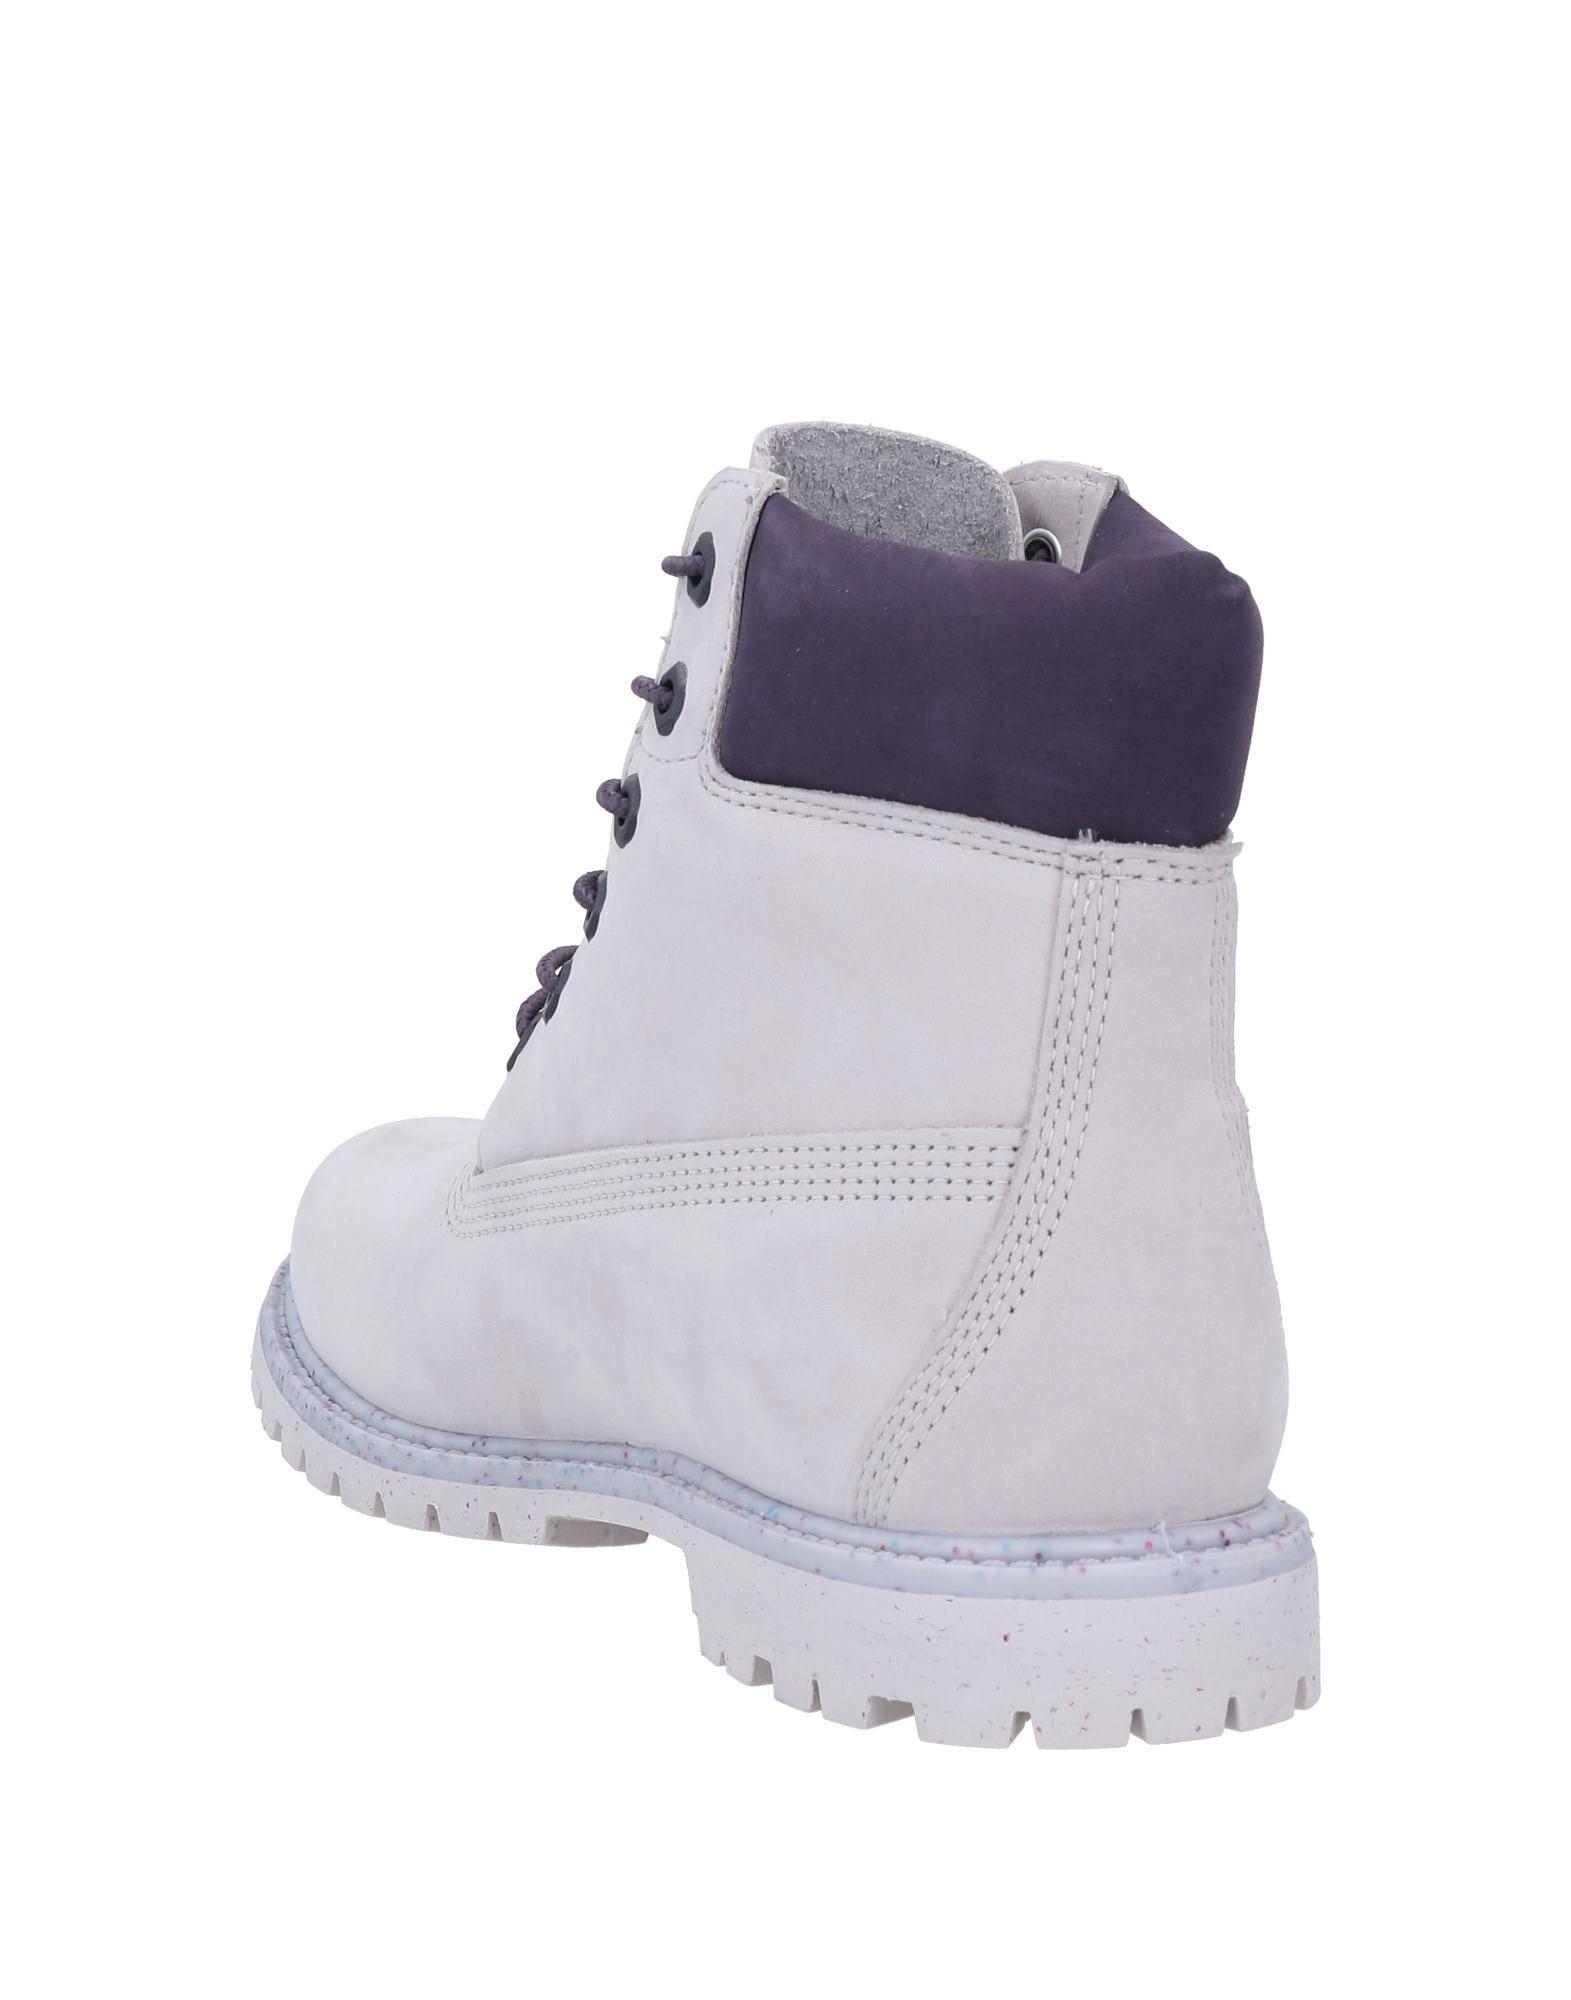 Botas Timberland Lilas Luxembourg, SAVE 38% - www.morionjoyeria.com